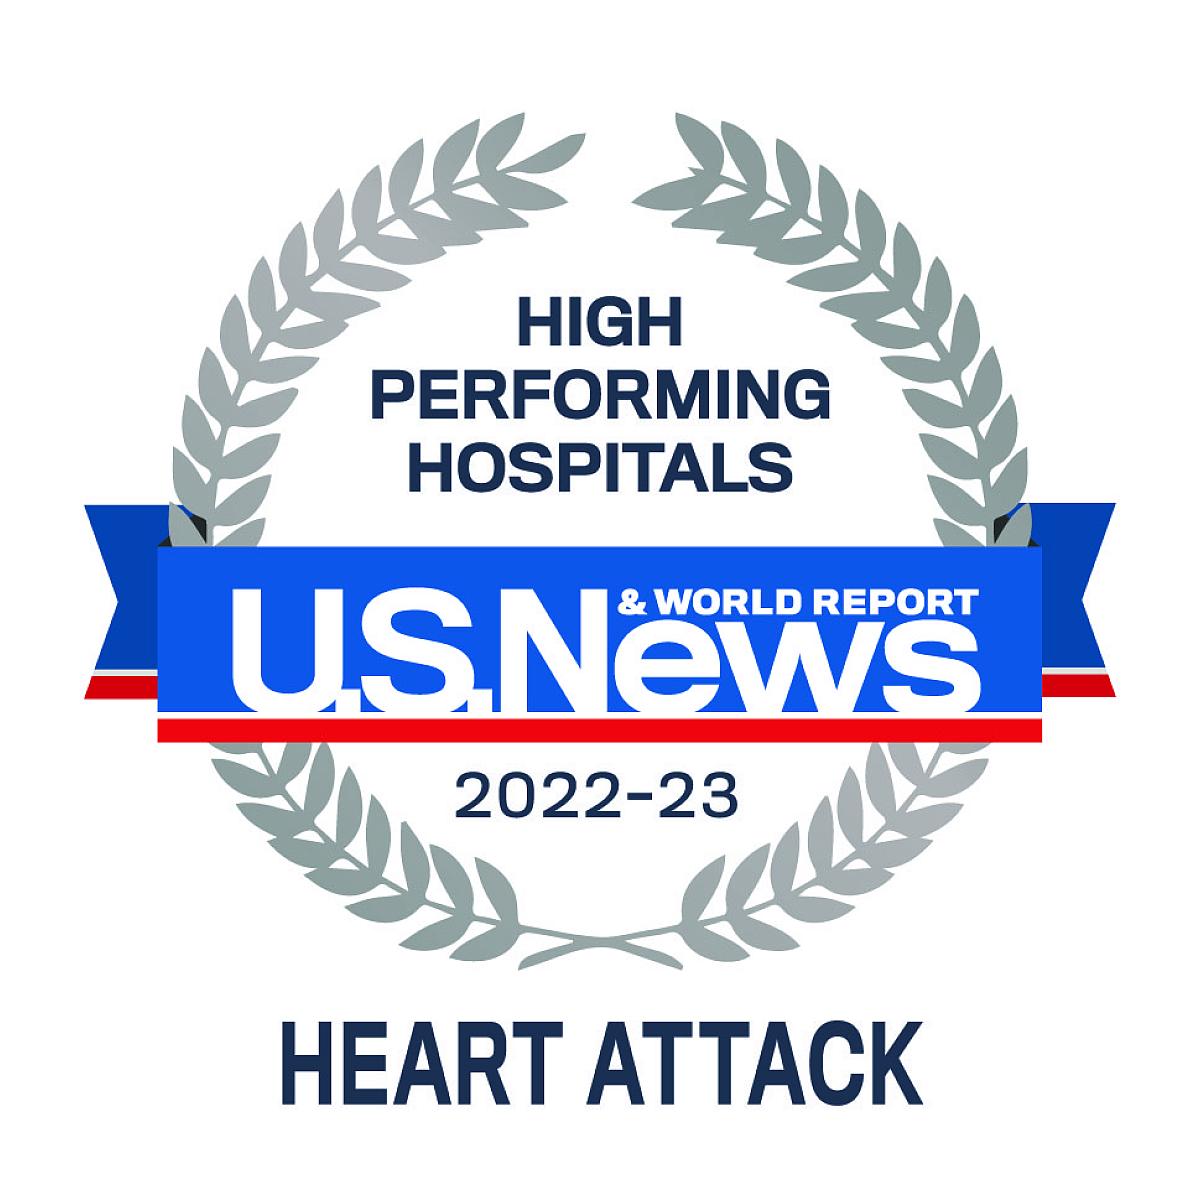 U.S. News and World Report High Performing Heart Attack